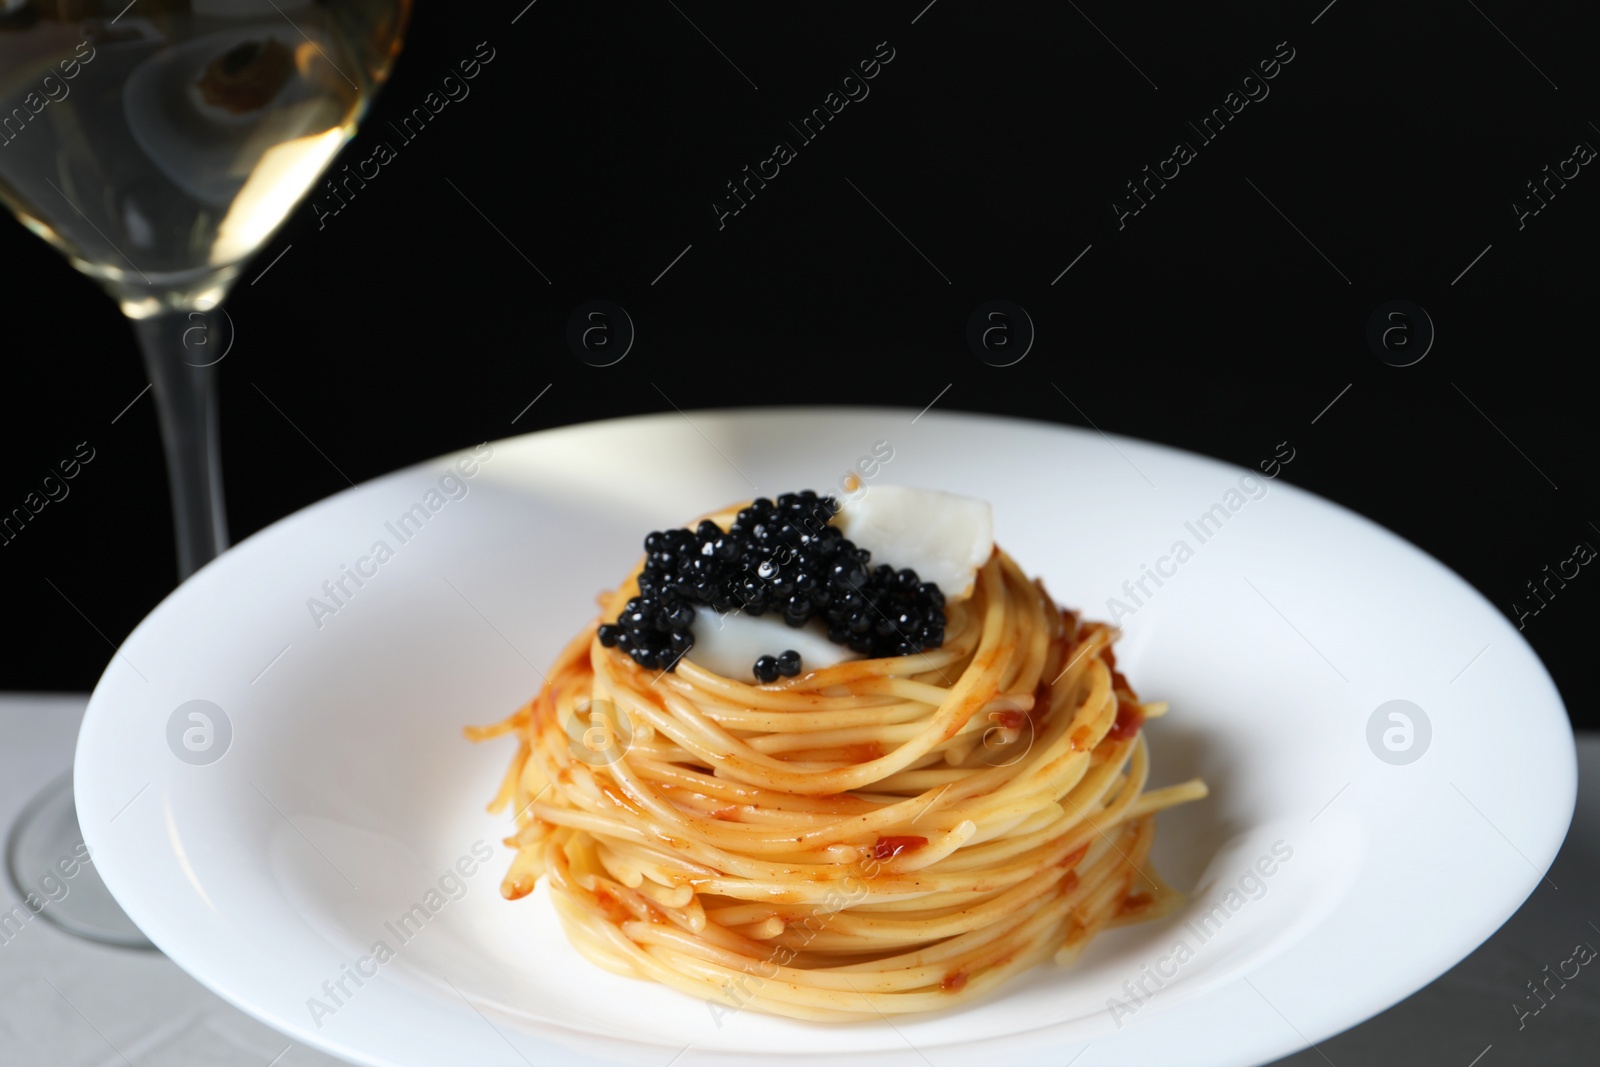 Photo of Tasty spaghetti with tomato sauce and black caviar on plate against dark background, closeup. Exquisite presentation of pasta dish